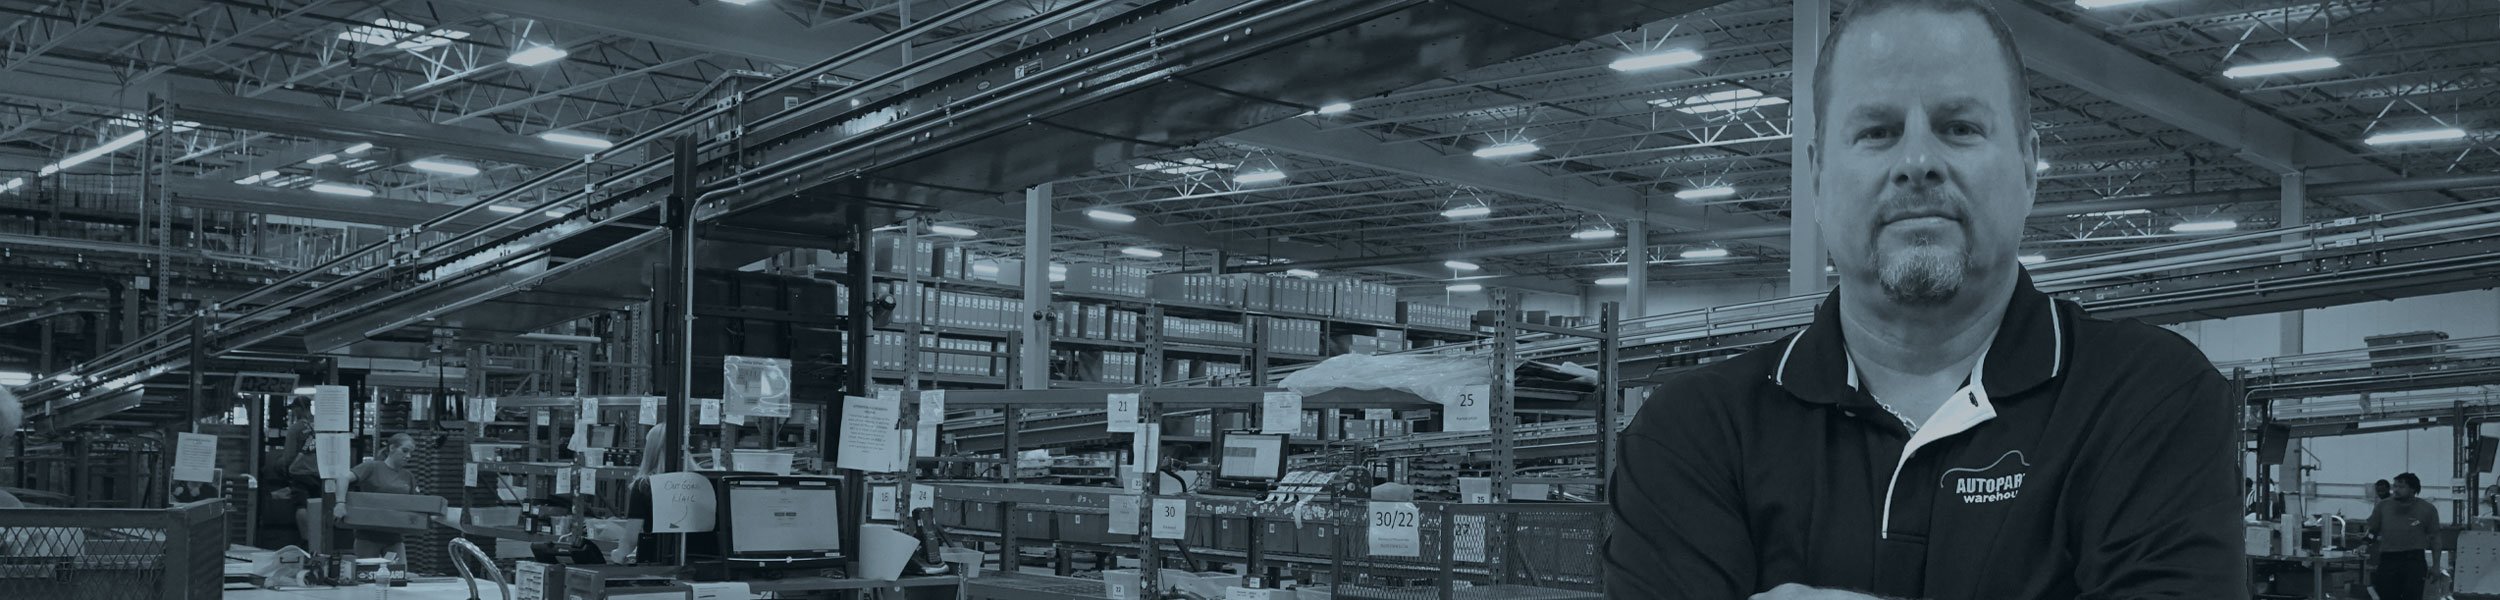 A man crossing his arms standing in a warehouse